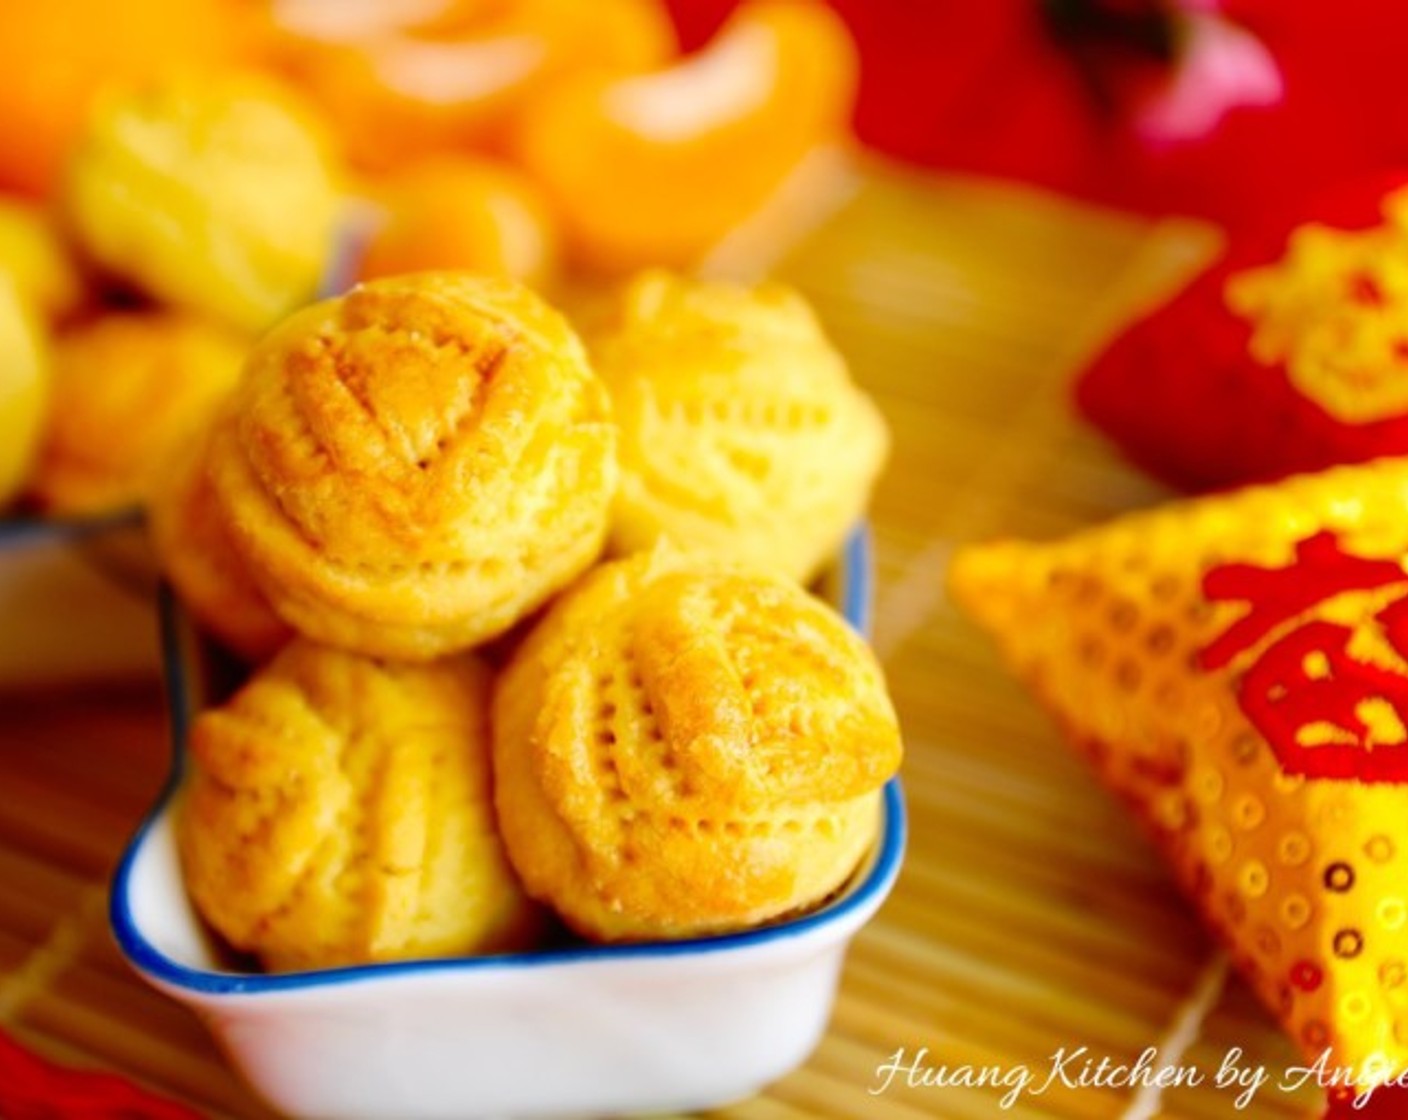 step 23 These pineapple tarts are a great favorite during festive seasons especially for Chinese New Year. No Chinese New Year is complete without these pineapple tarts.